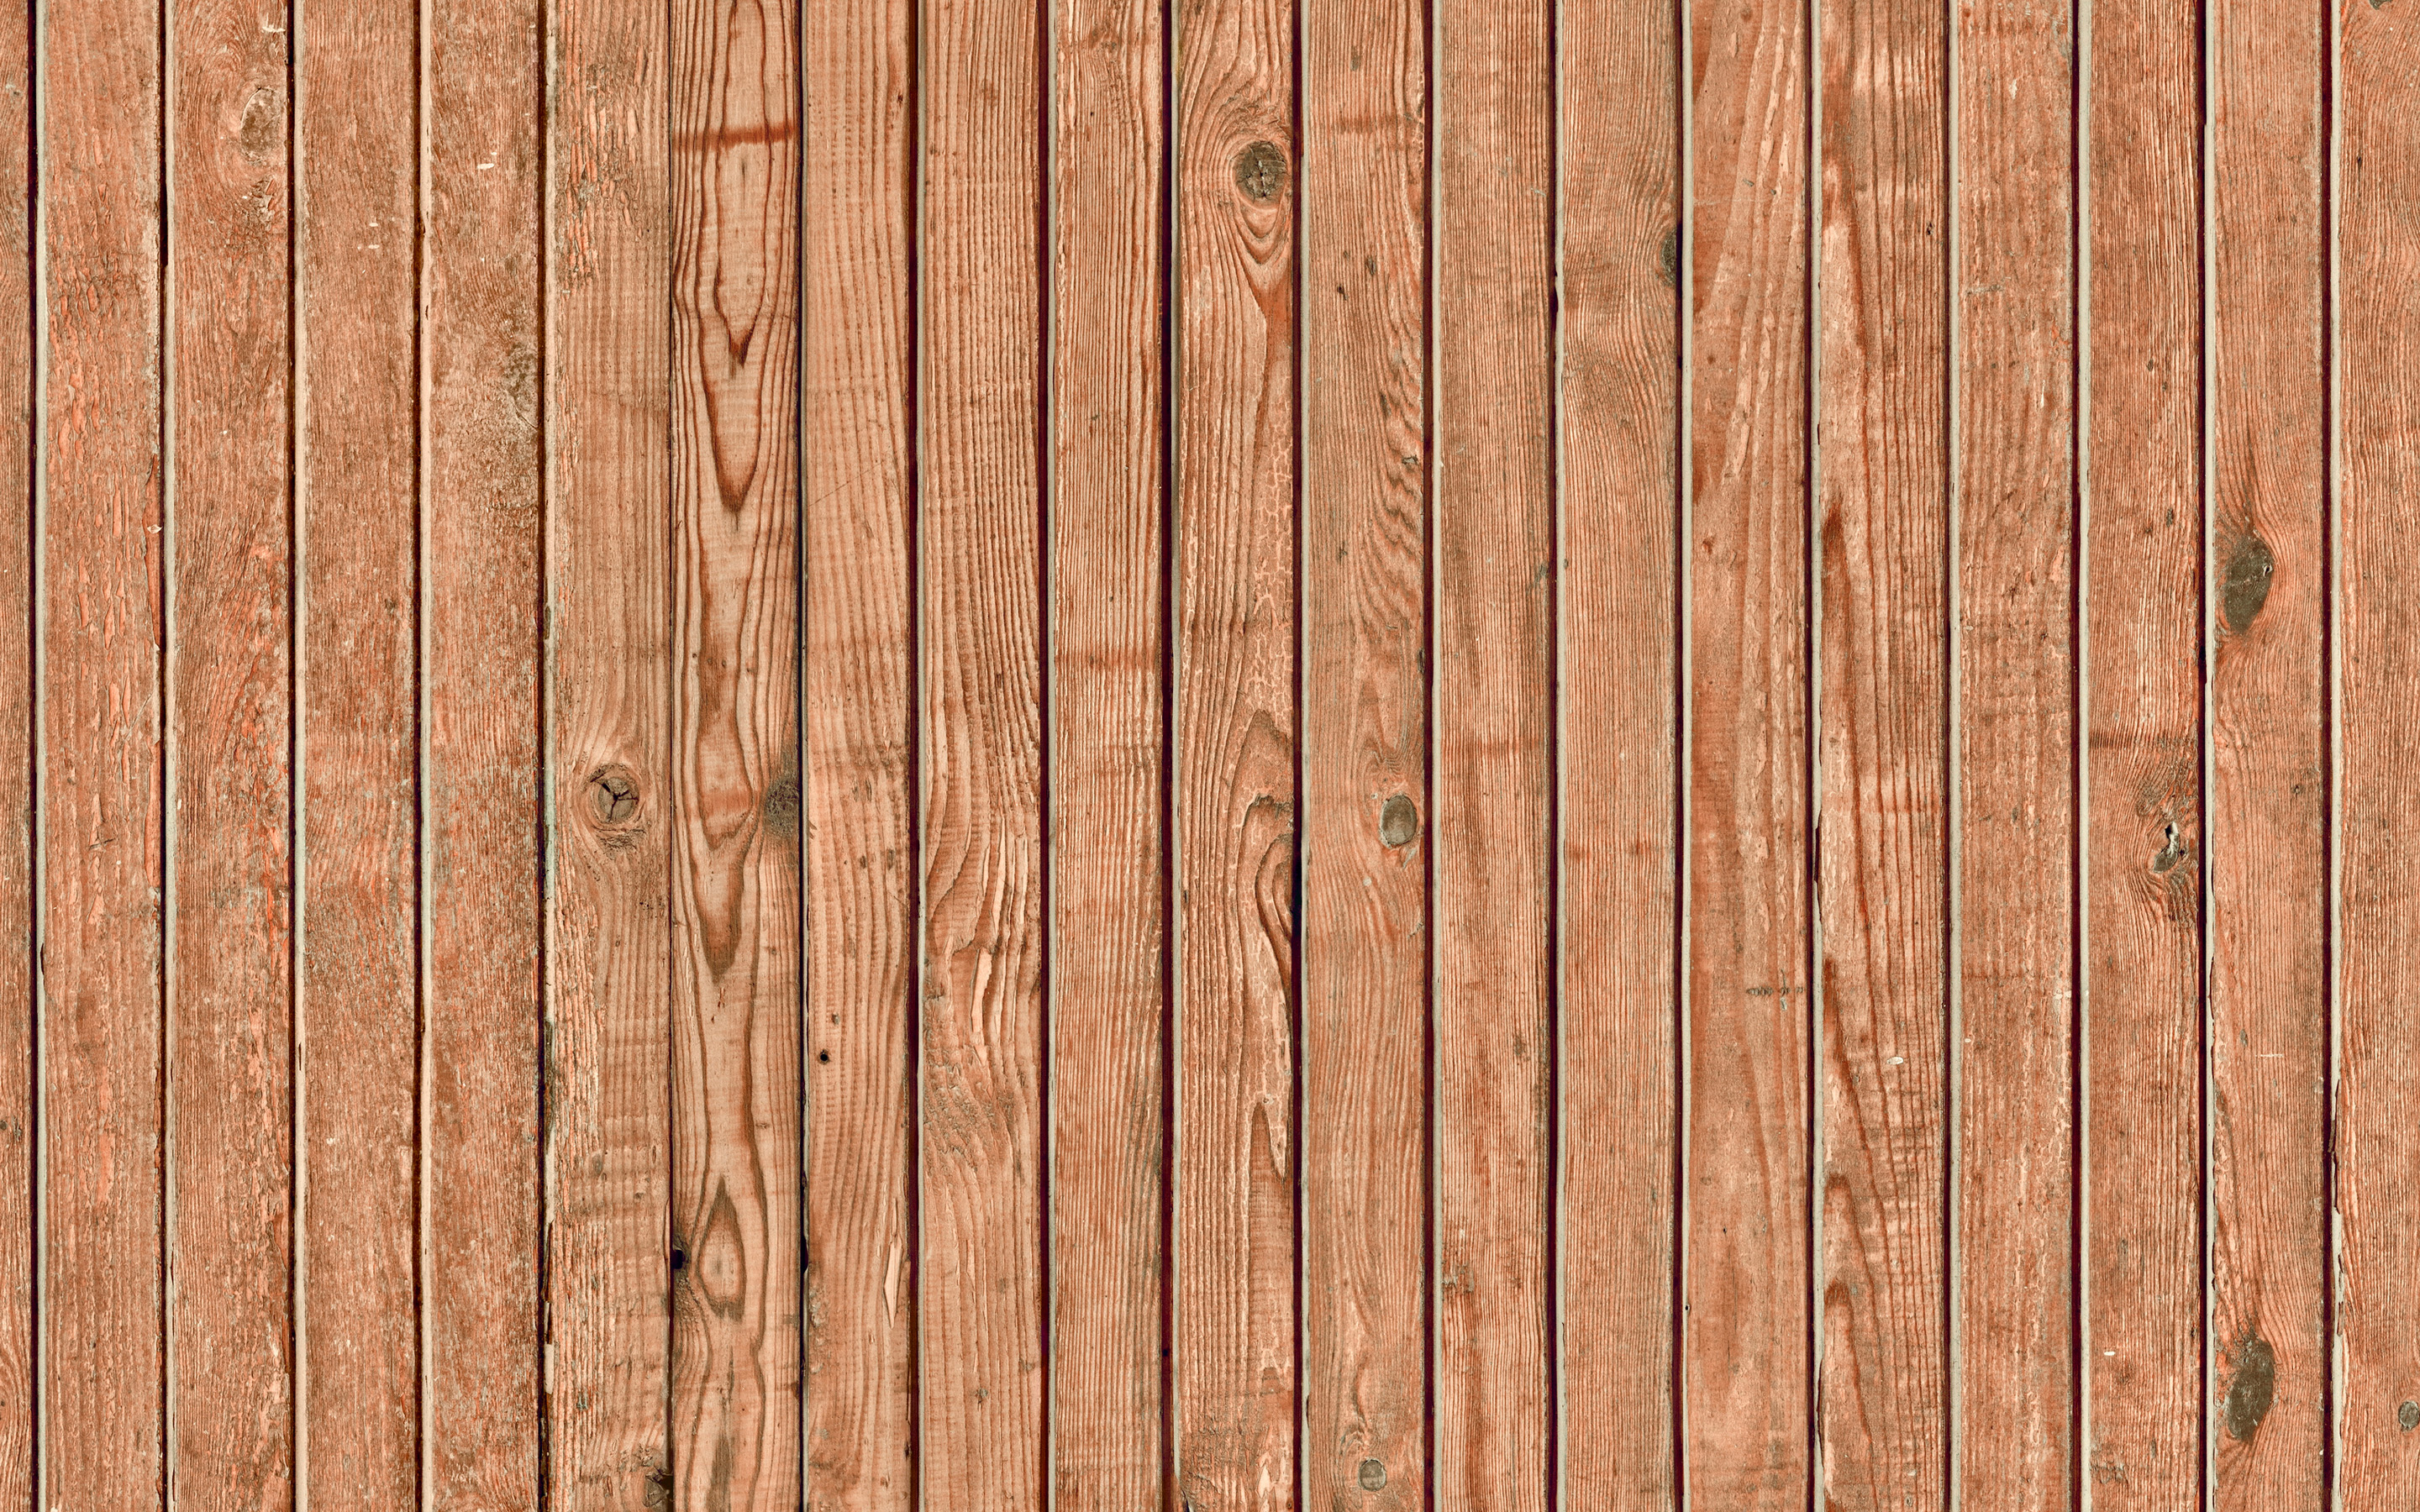 Download wallpaper brown wooden planks, brown wooden texture, wood planks, wooden background, vertical wooden boards, brown wooden boards, wooden planks, brown background, wooden textures for desktop with resolution 2880x1800. High Quality HD